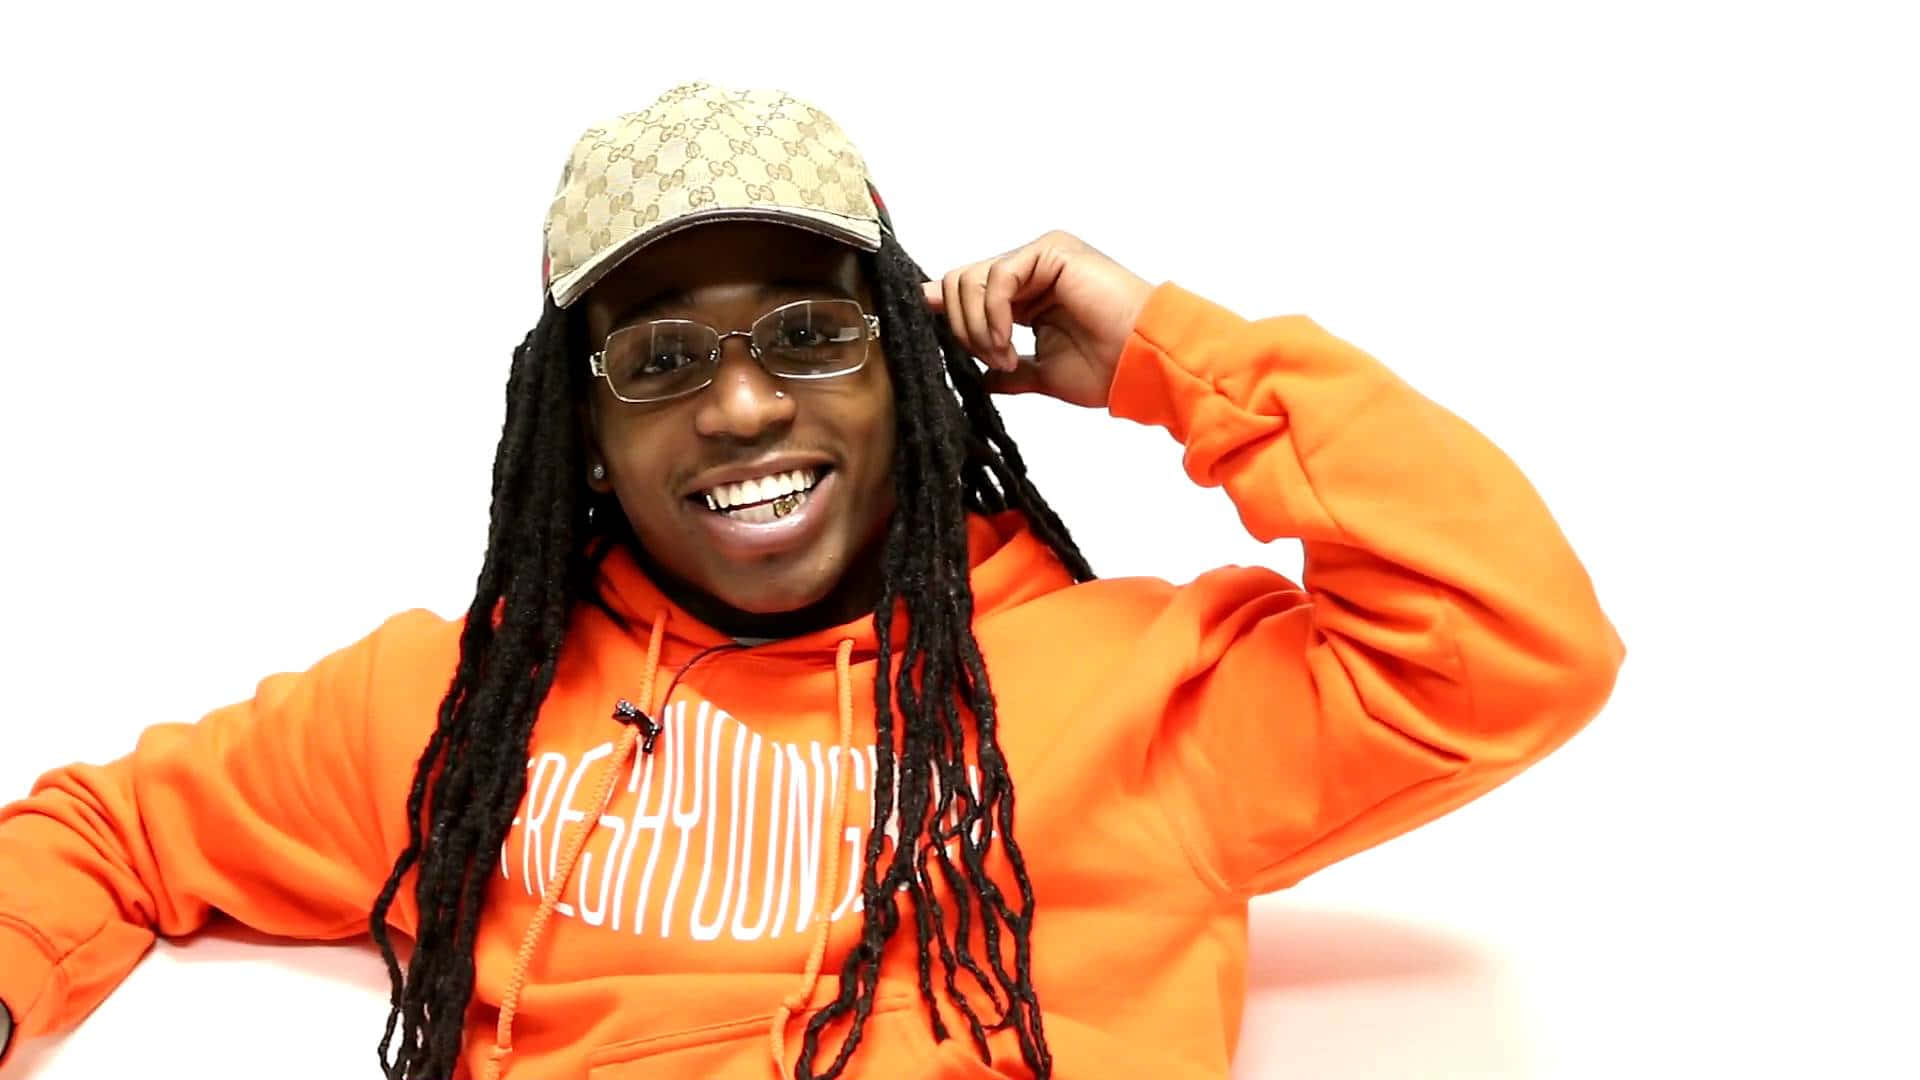 Jacquees performs on stage in front of a sold out crowd Wallpaper